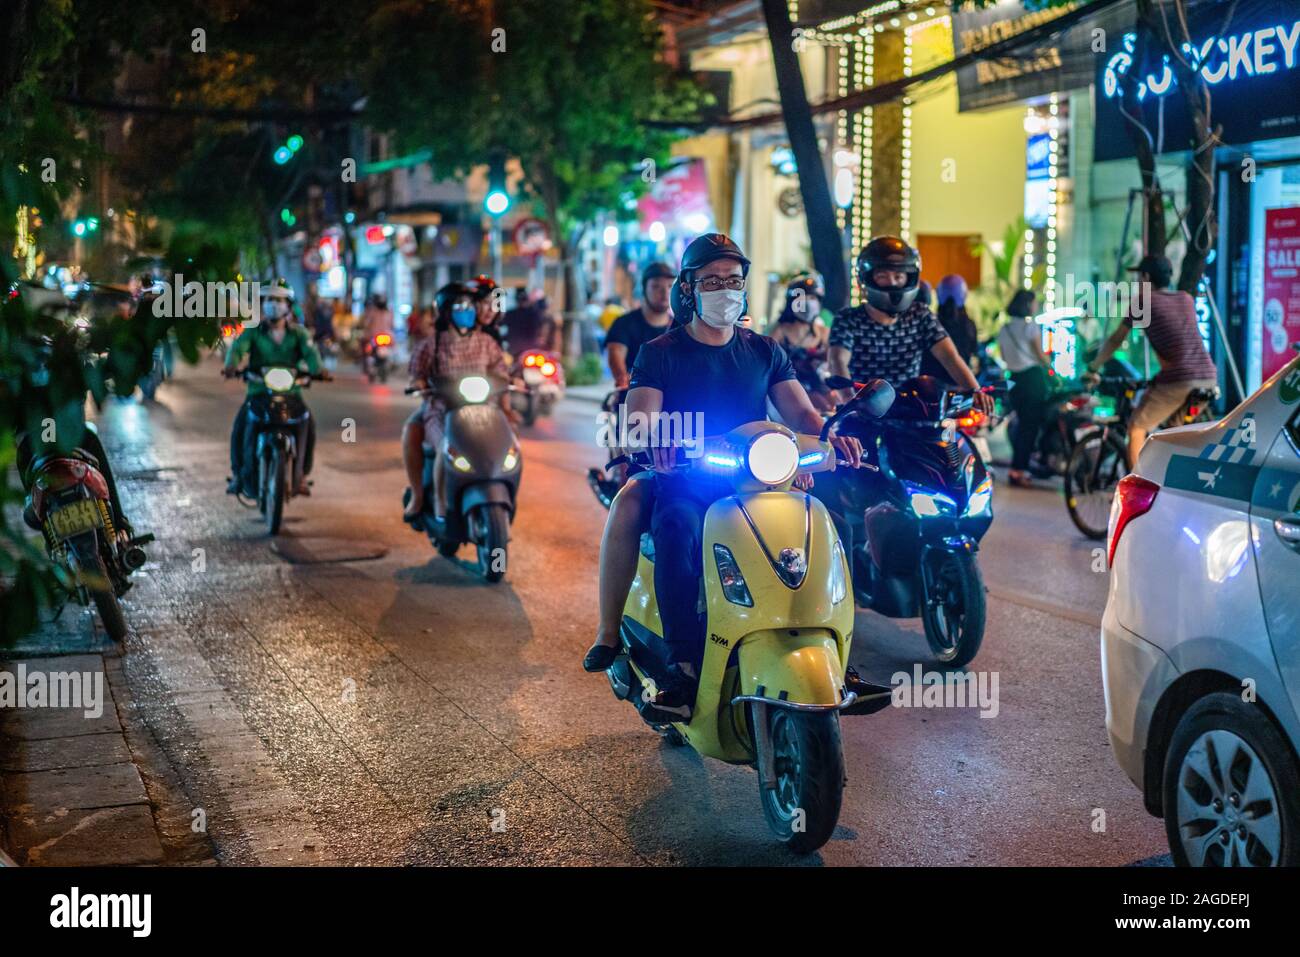 HANOI, VIETNAM - Oct 22, 2019: A group of people wearing masks riding cool motorcycles in Hanoi, Vietnam Stock Photo